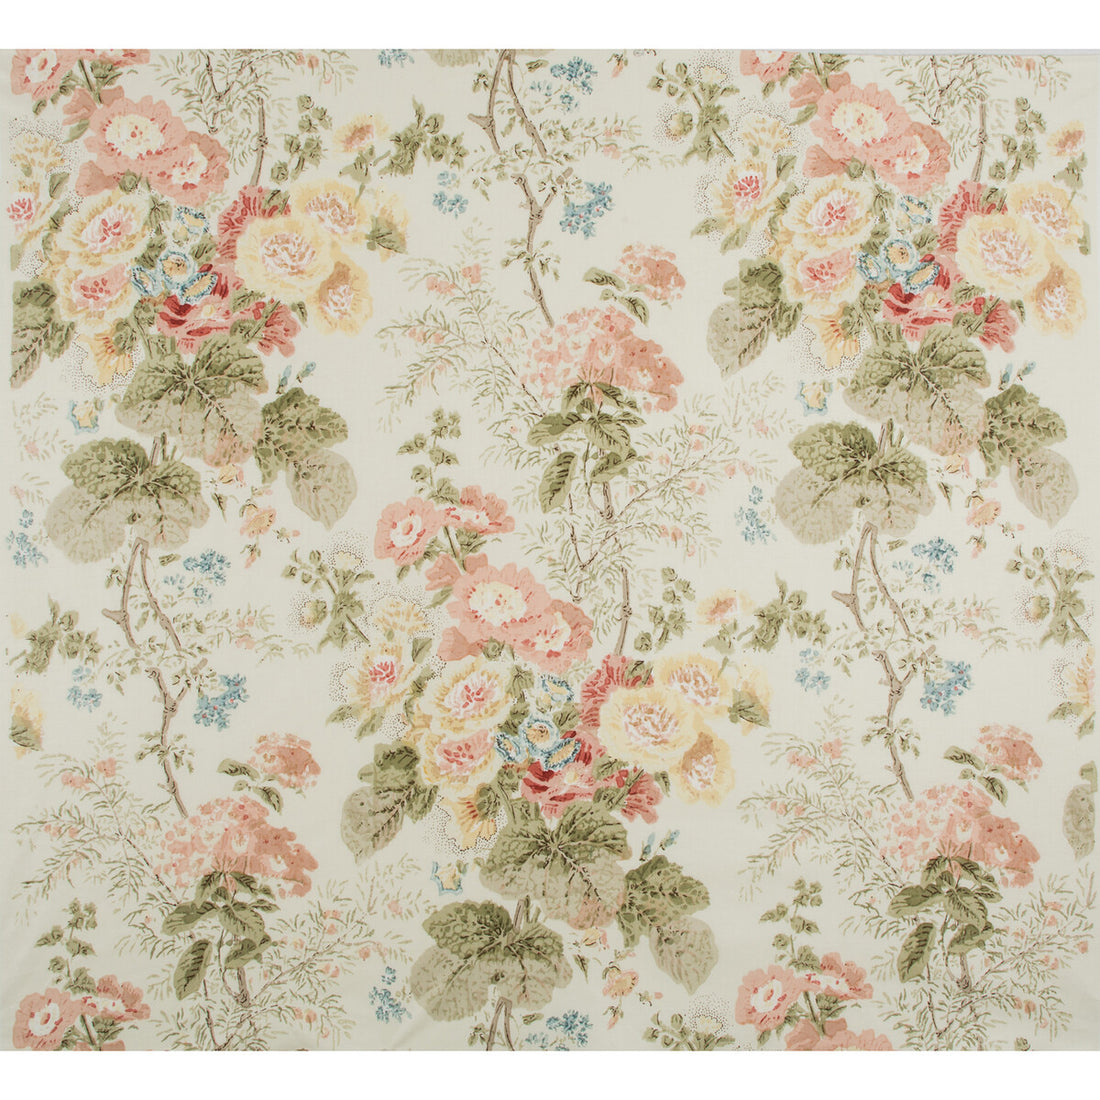 Hollyhock Hdb fabric in coral/olive color - pattern 2005100.730.0 - by Lee Jofa